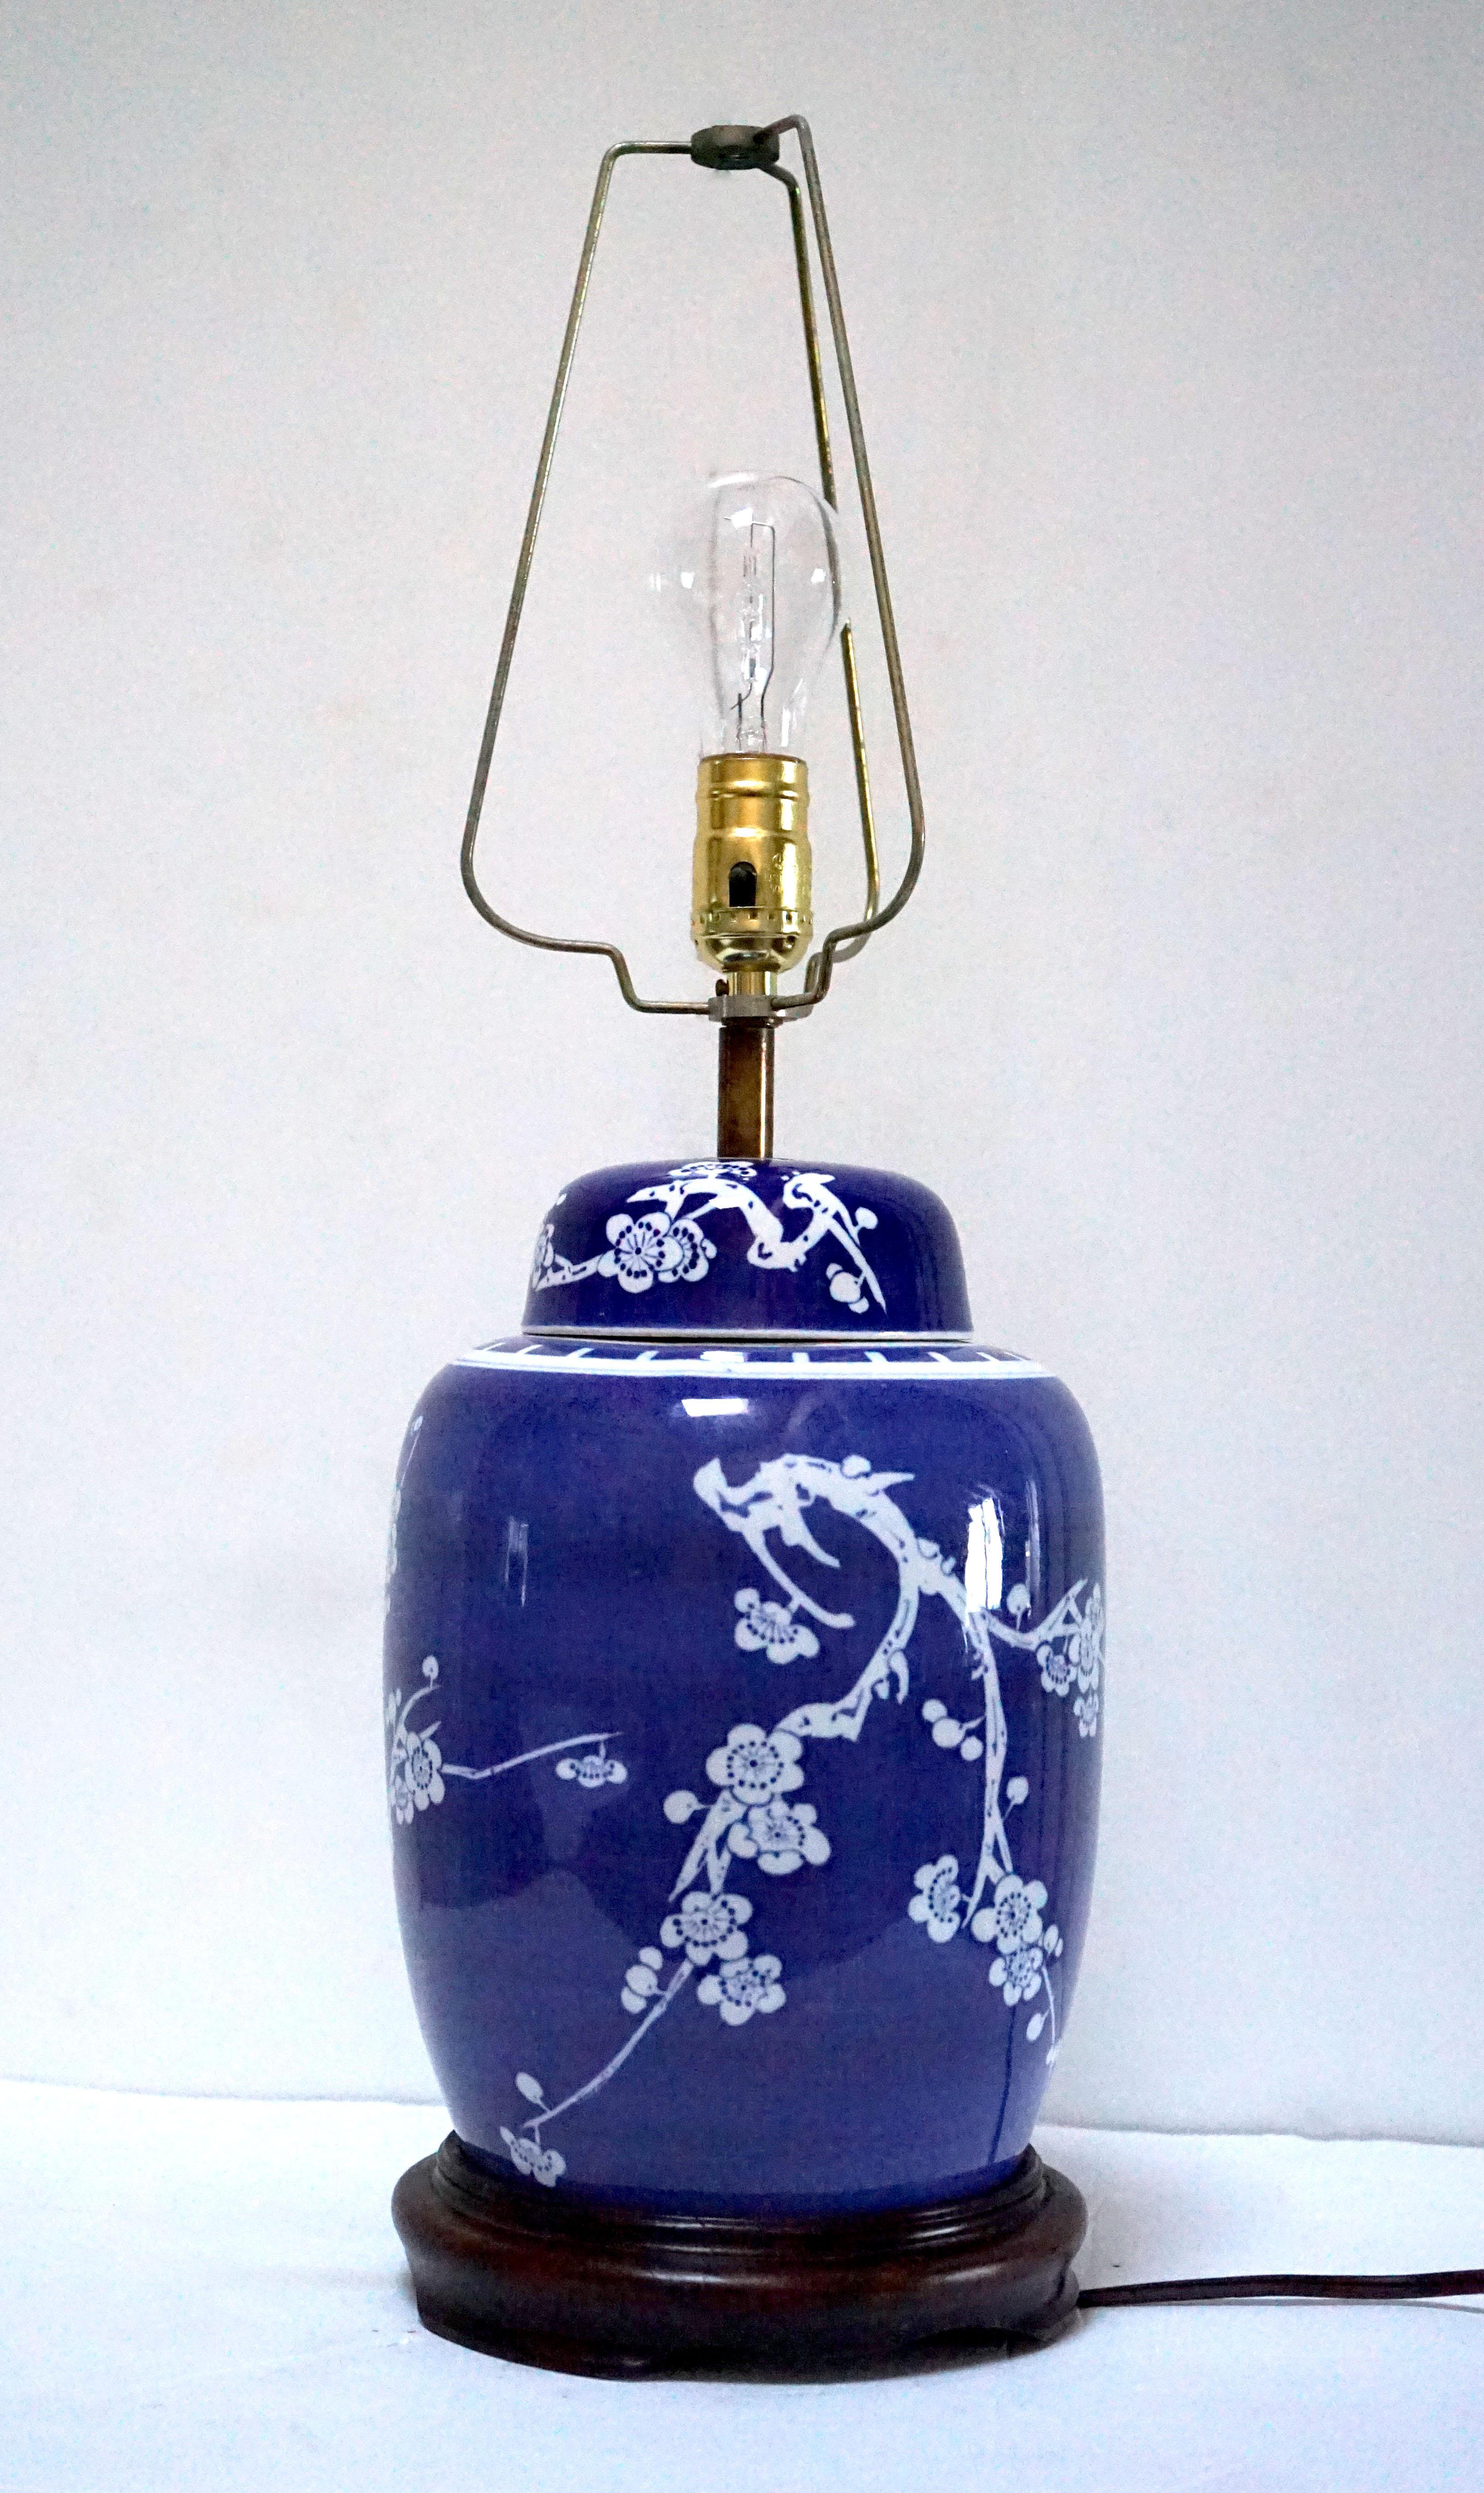 Ceramic Cobalt Blue and White Prunus Cherry Blossom Vintage Table Lamp on Walnut Stand